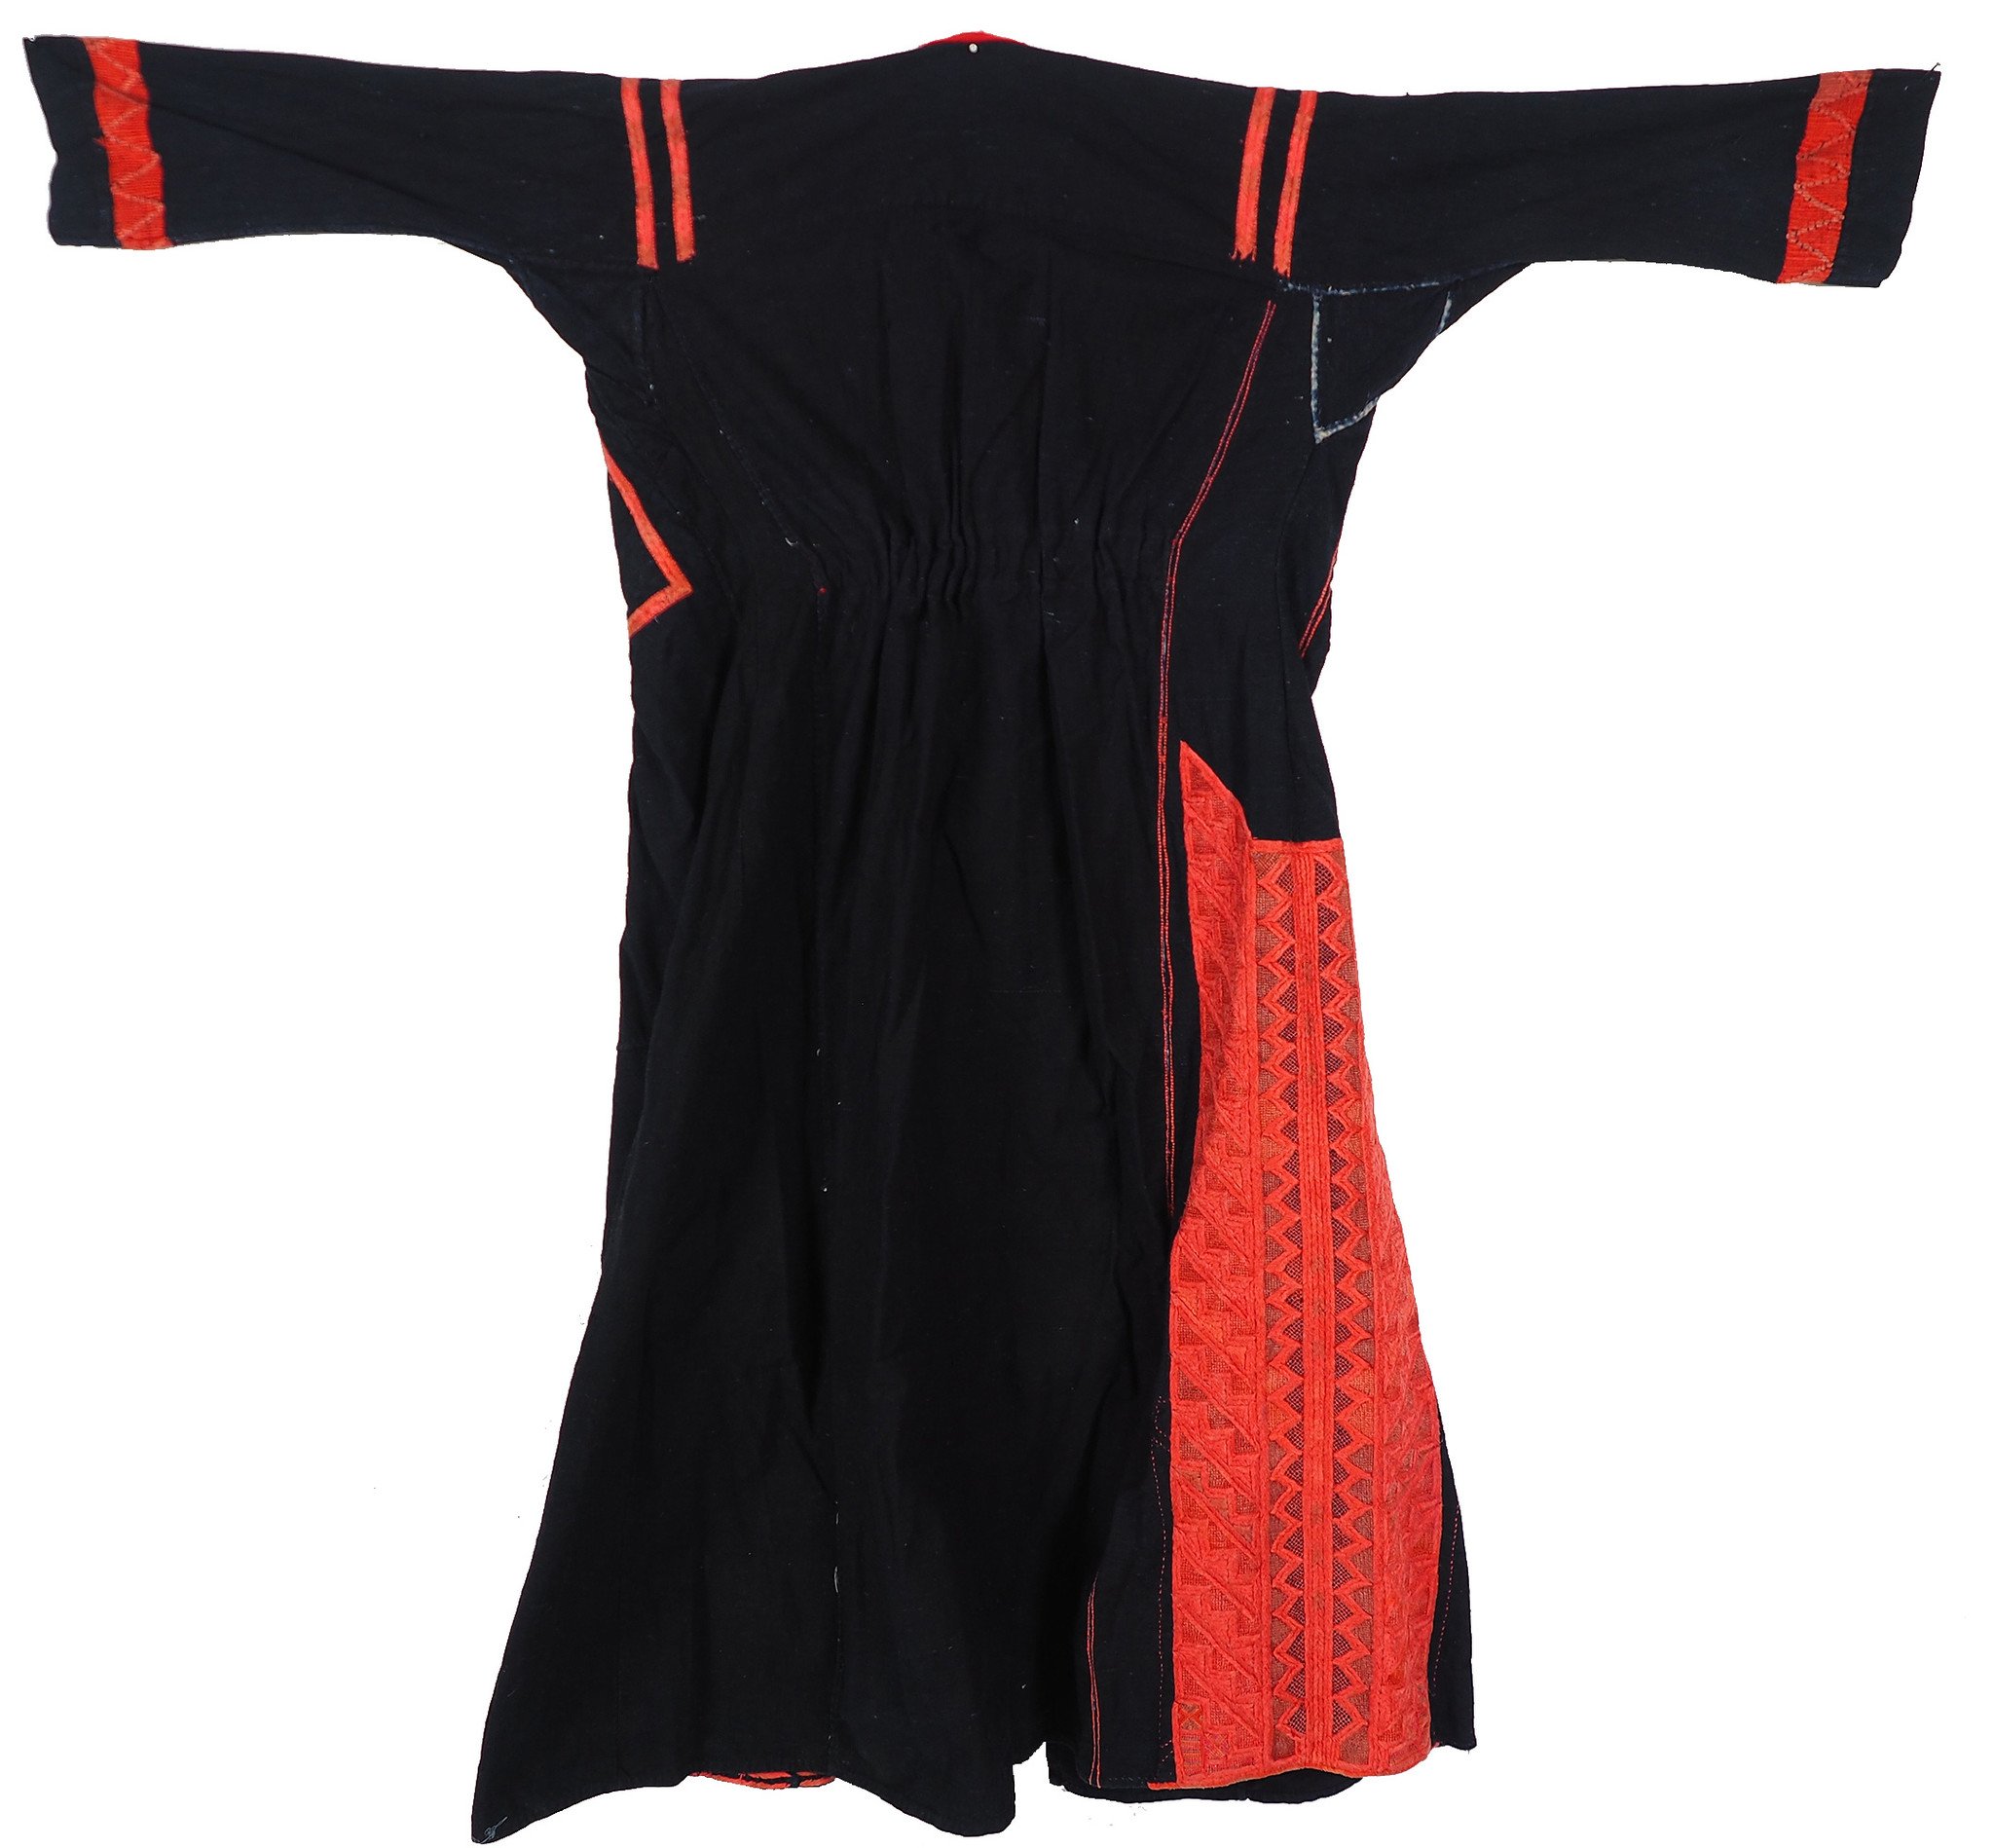 Palestinian girls embroidered ethnic dress No:20